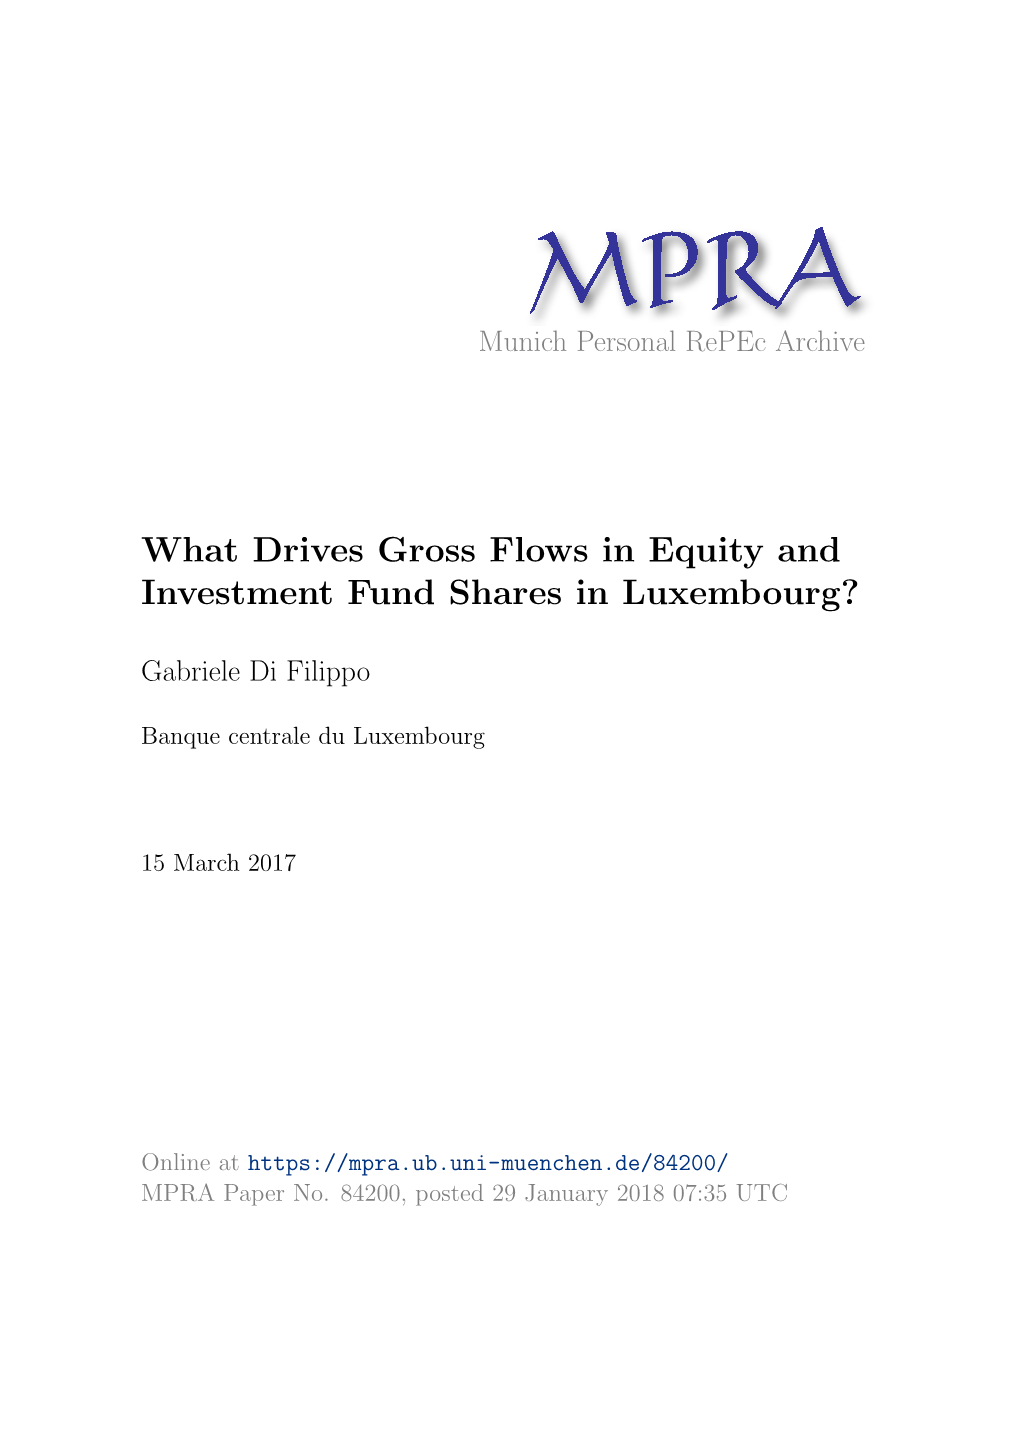 What Drives Gross Flows in Equity and Investment Fund Shares in Luxembourg?